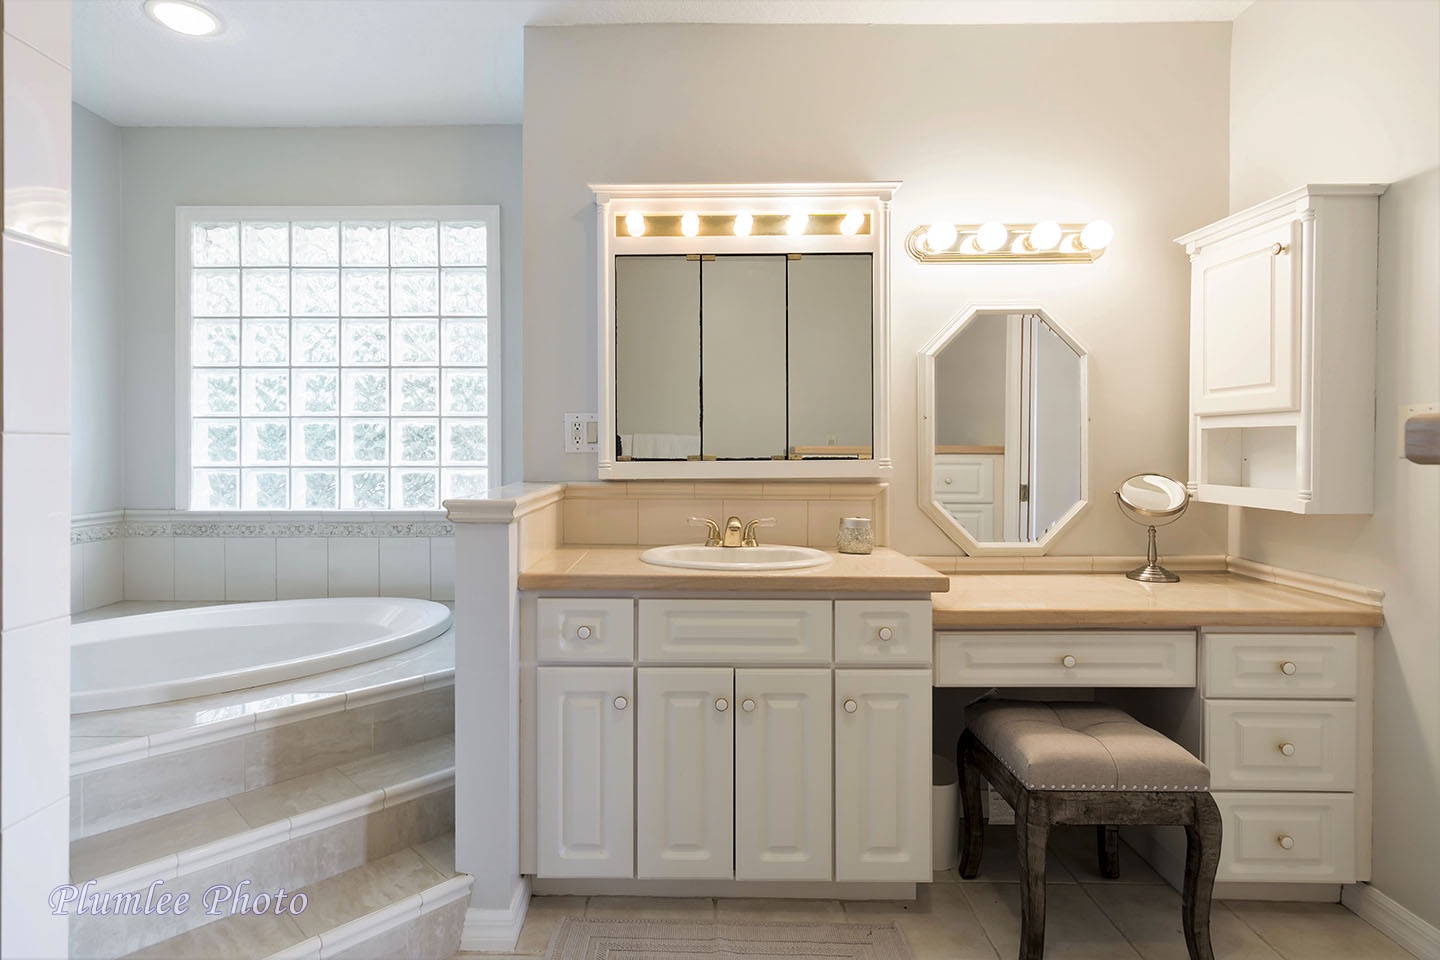 Convenient sink and vanity area in the master bathroom.